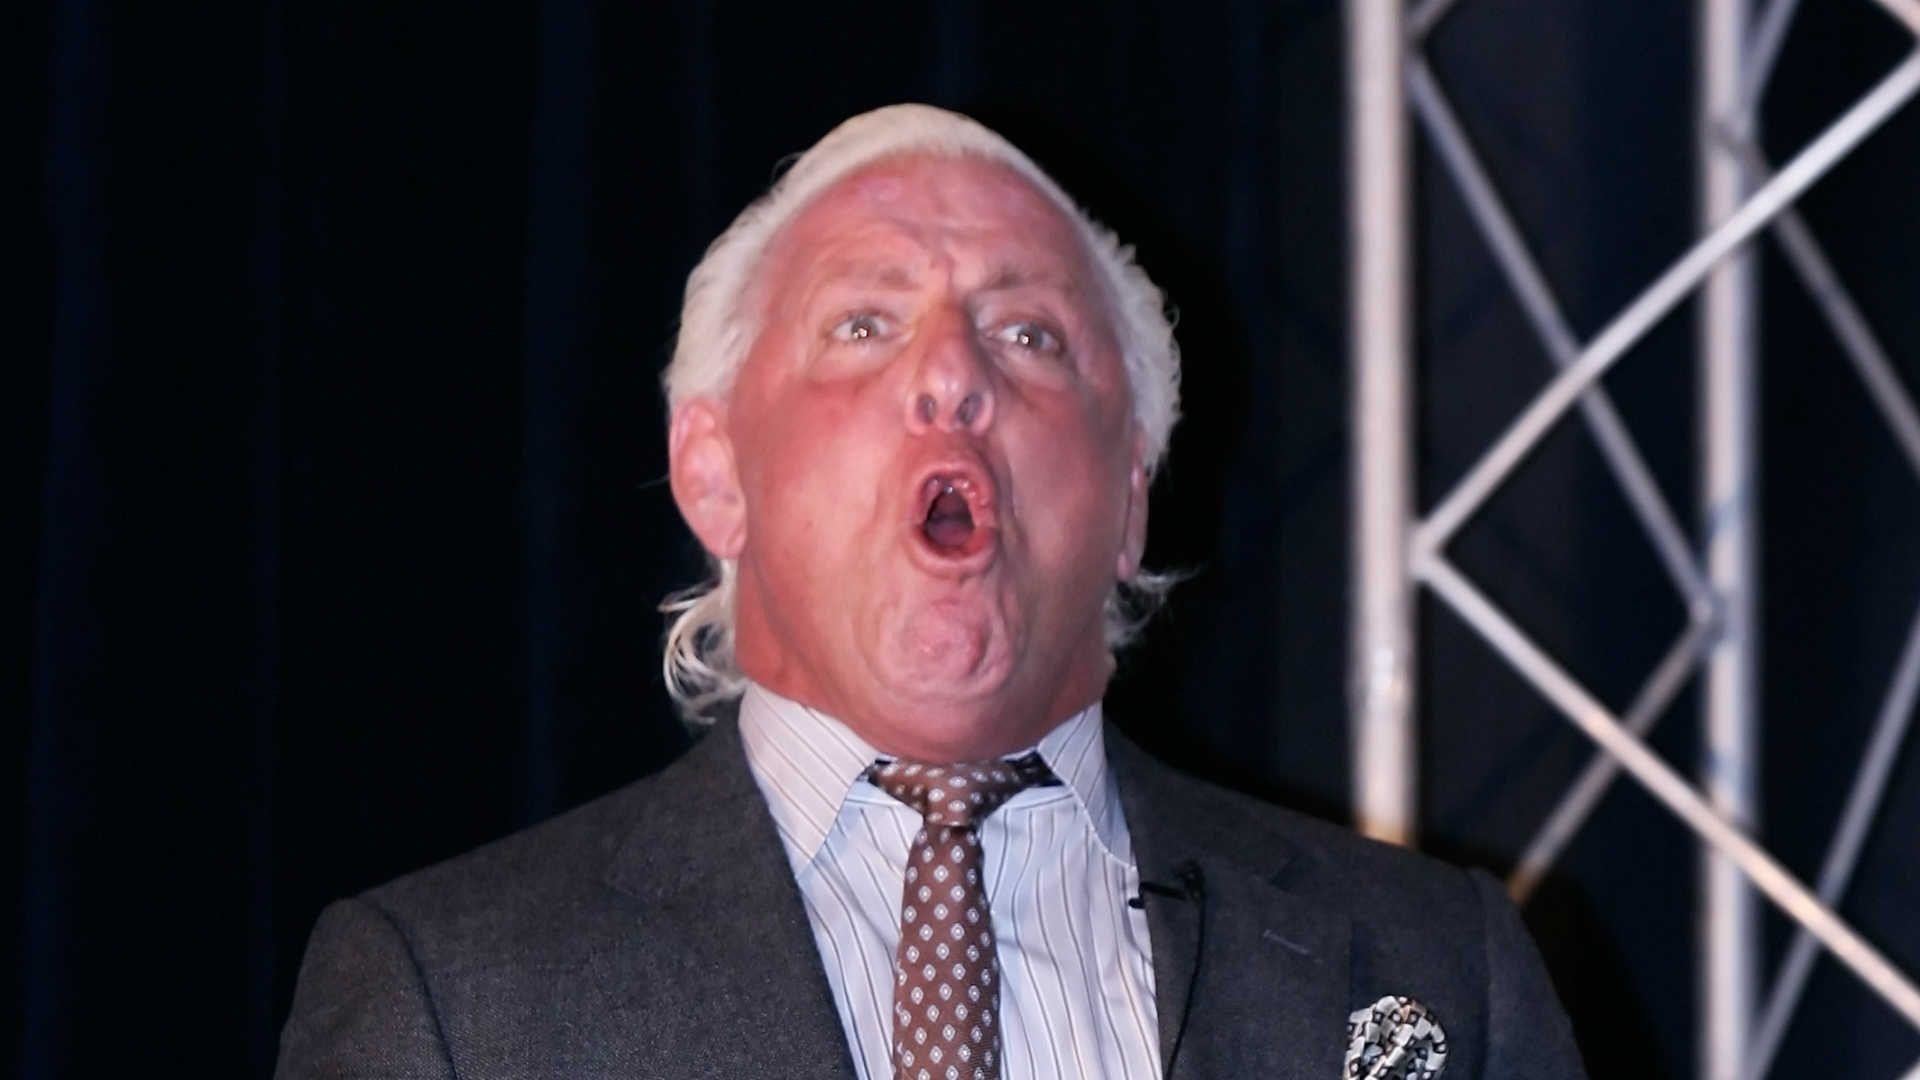 1920x1080 Watch Ric Flair, 67, deadlift 400 pounds | Other Sports .